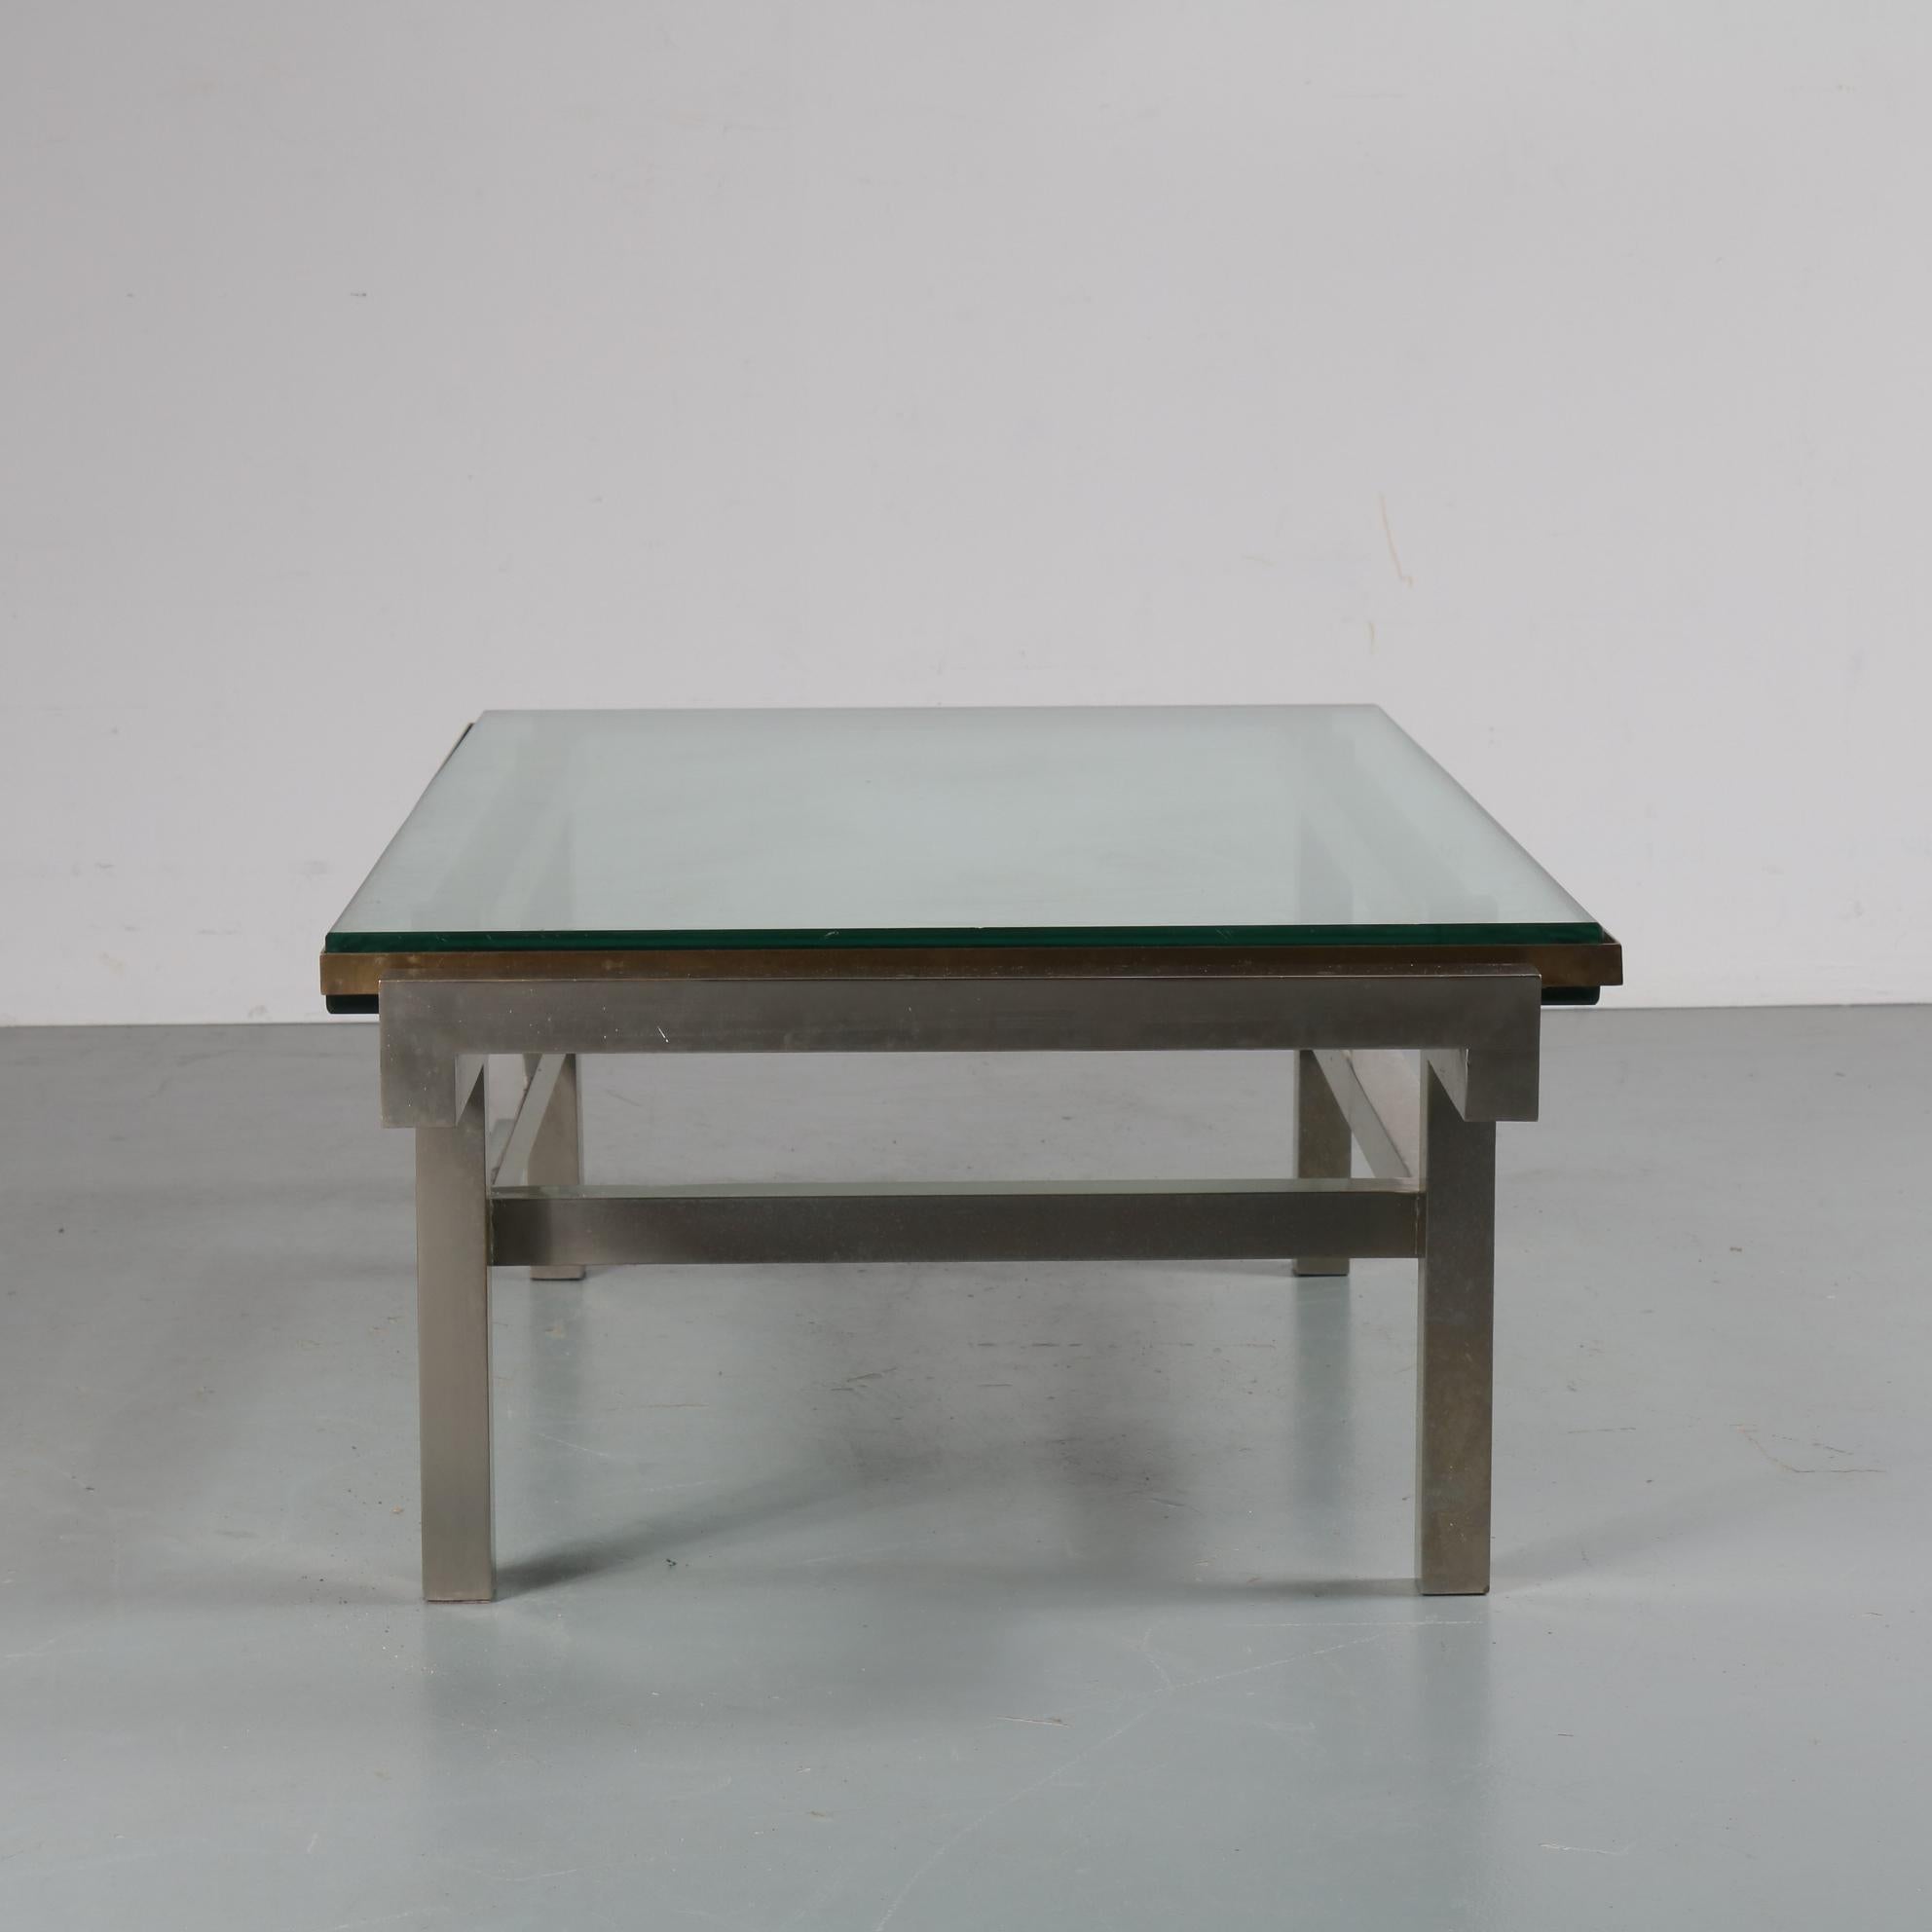 20th Century French Modernist Coffee Table in Steel and Brass, 1960